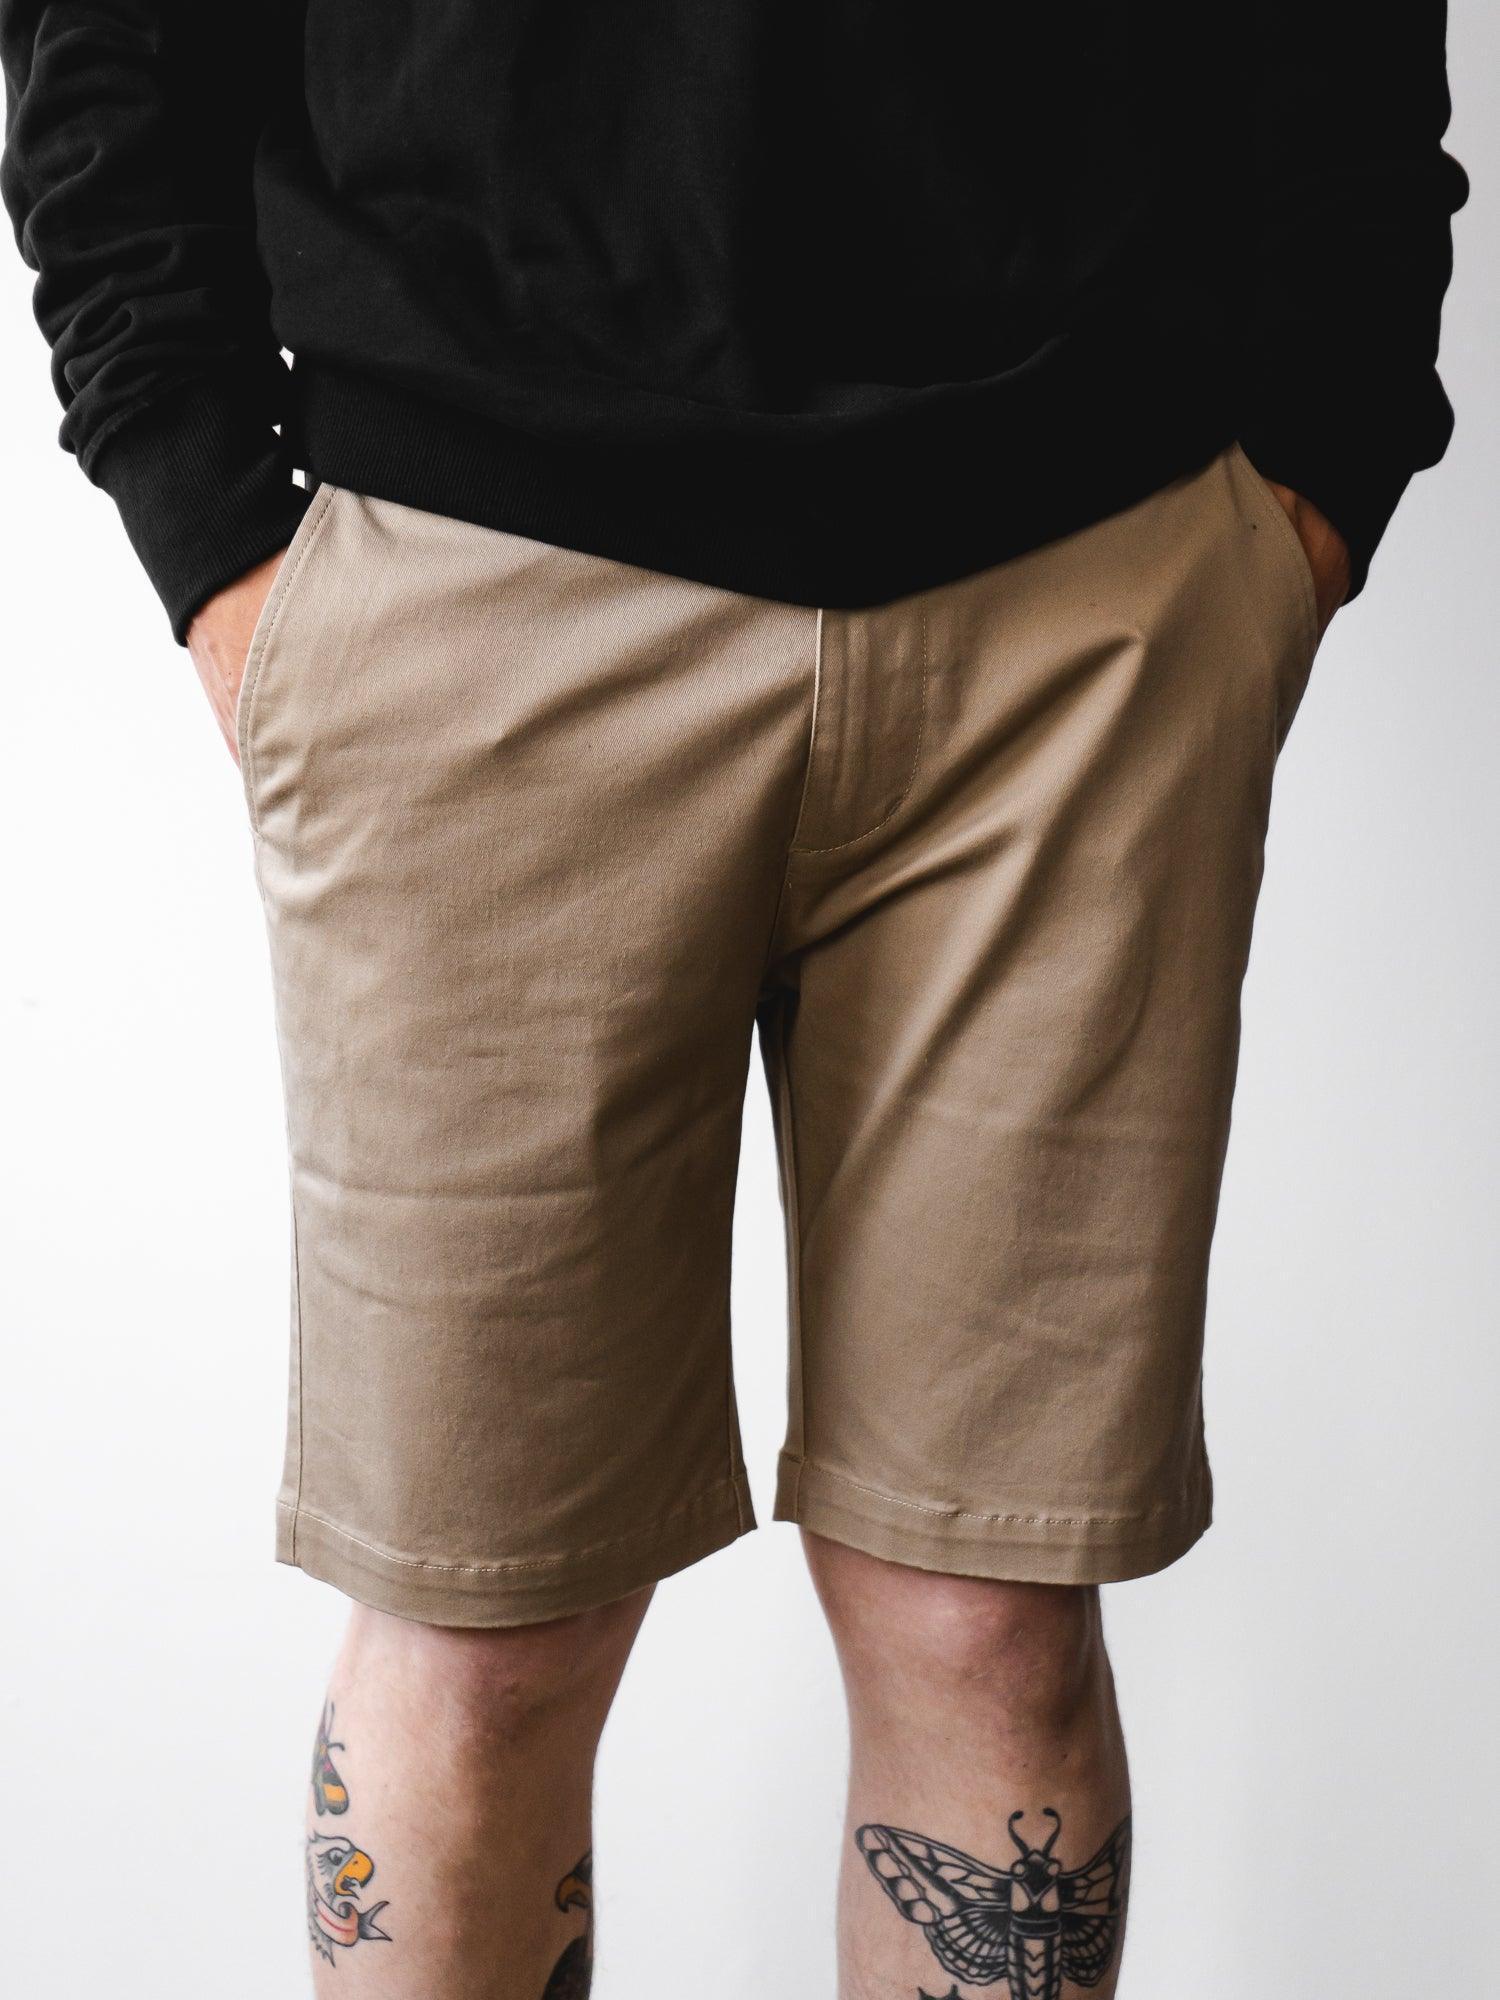 mens beige shorts watershed brand - classic short - surf shorts - lifestyle surf brand uk